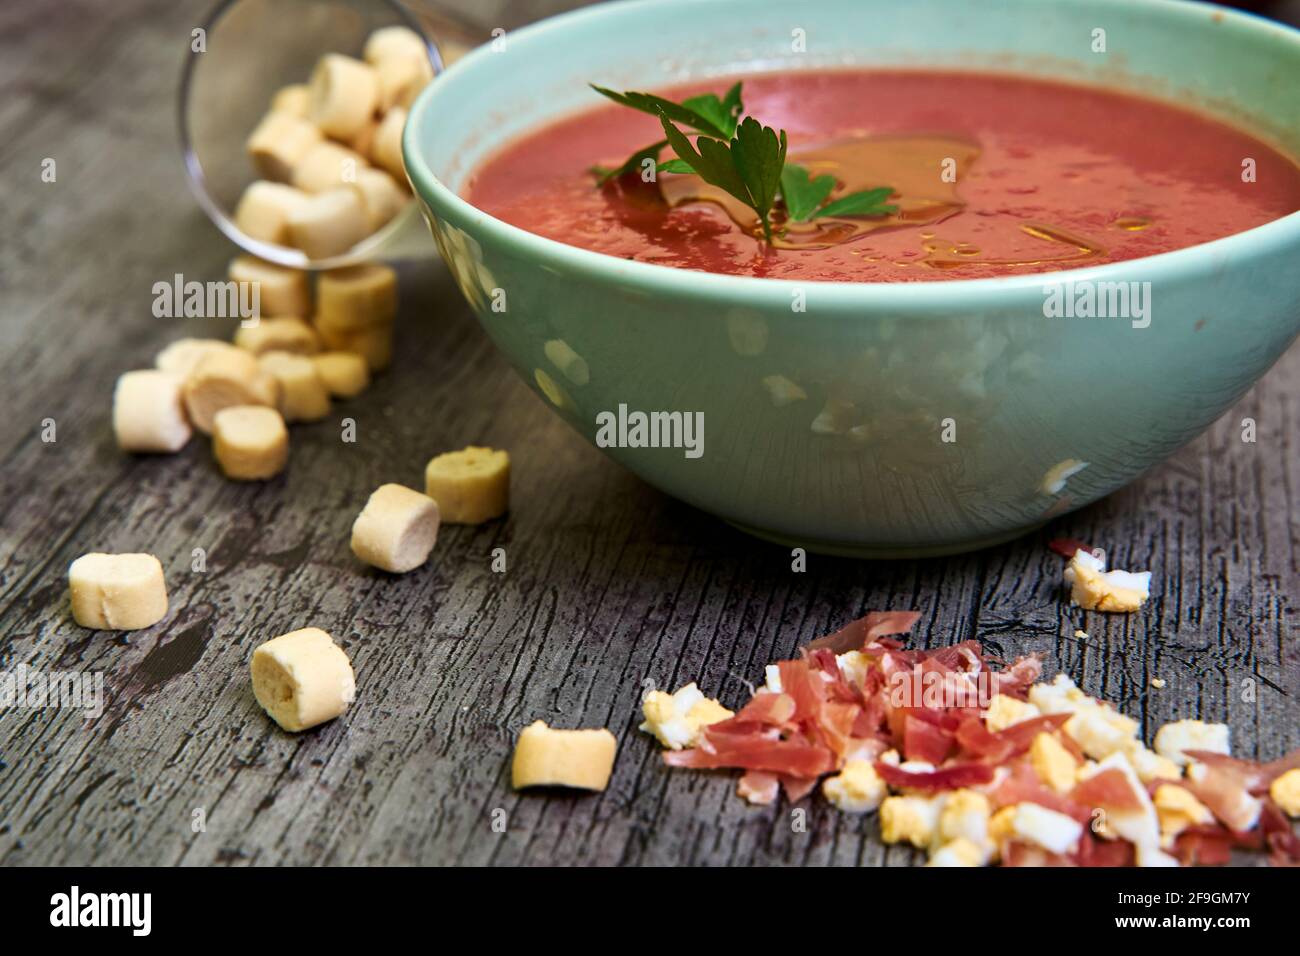 Close-up view of Andalusian gazpacho bowl with parsley and extra virgin olive oil, accompanied by croutons, Serrano ham and chopped boiled egg. Concep Stock Photo